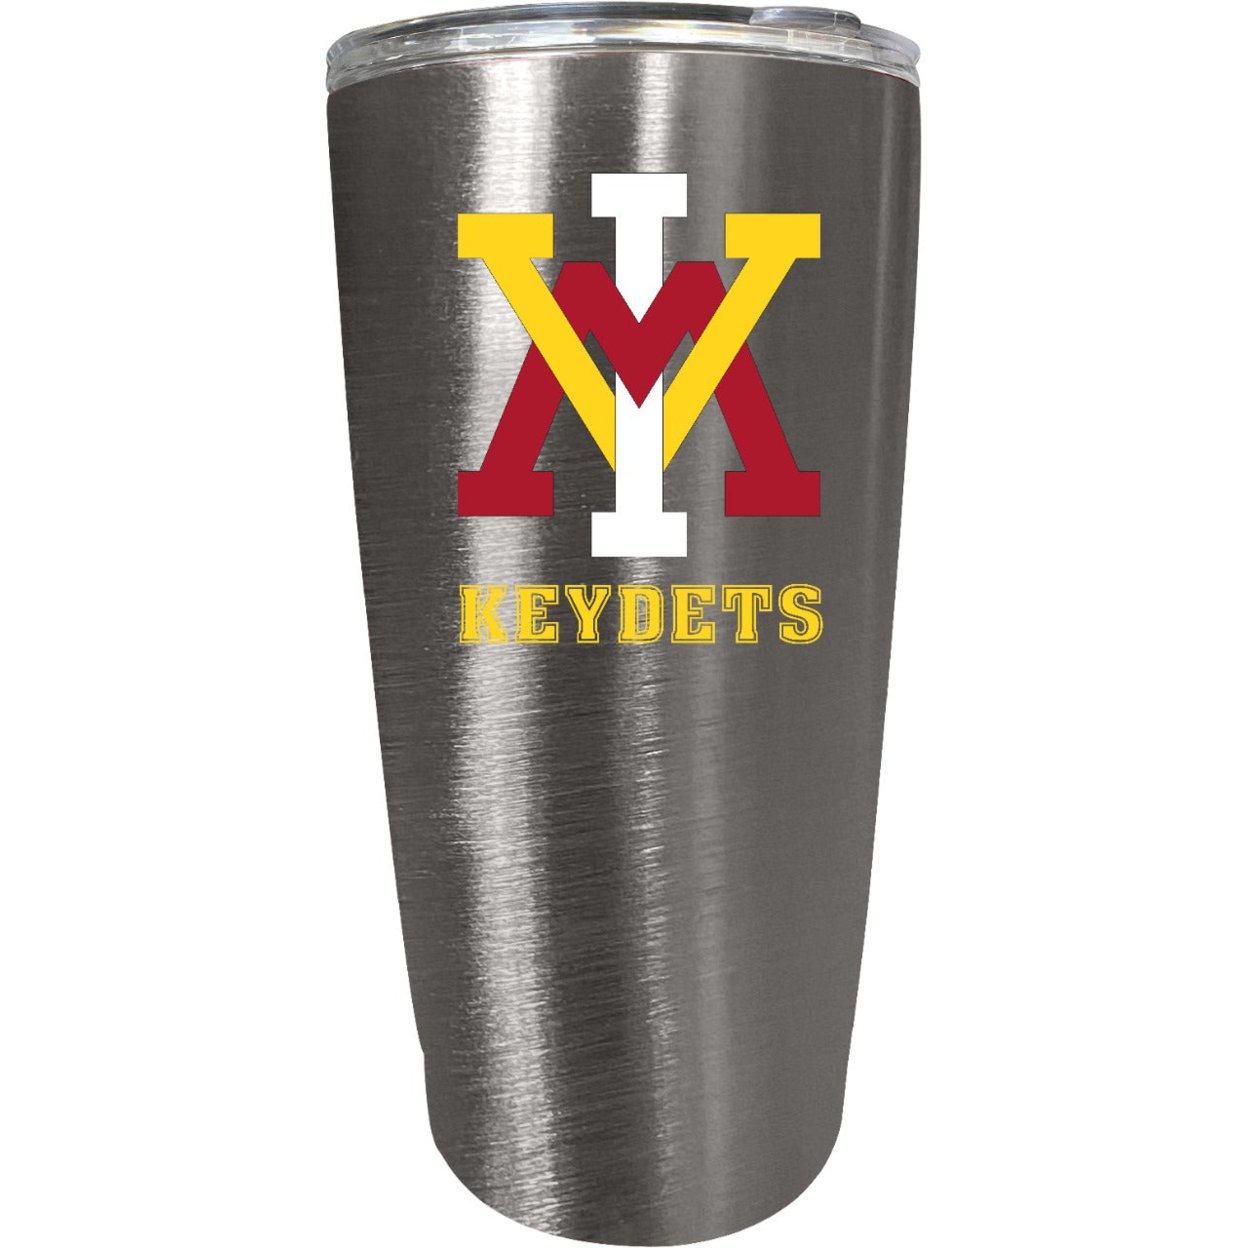 VMI Keydets 16 Oz Insulated Stainless Steel Tumbler Colorless